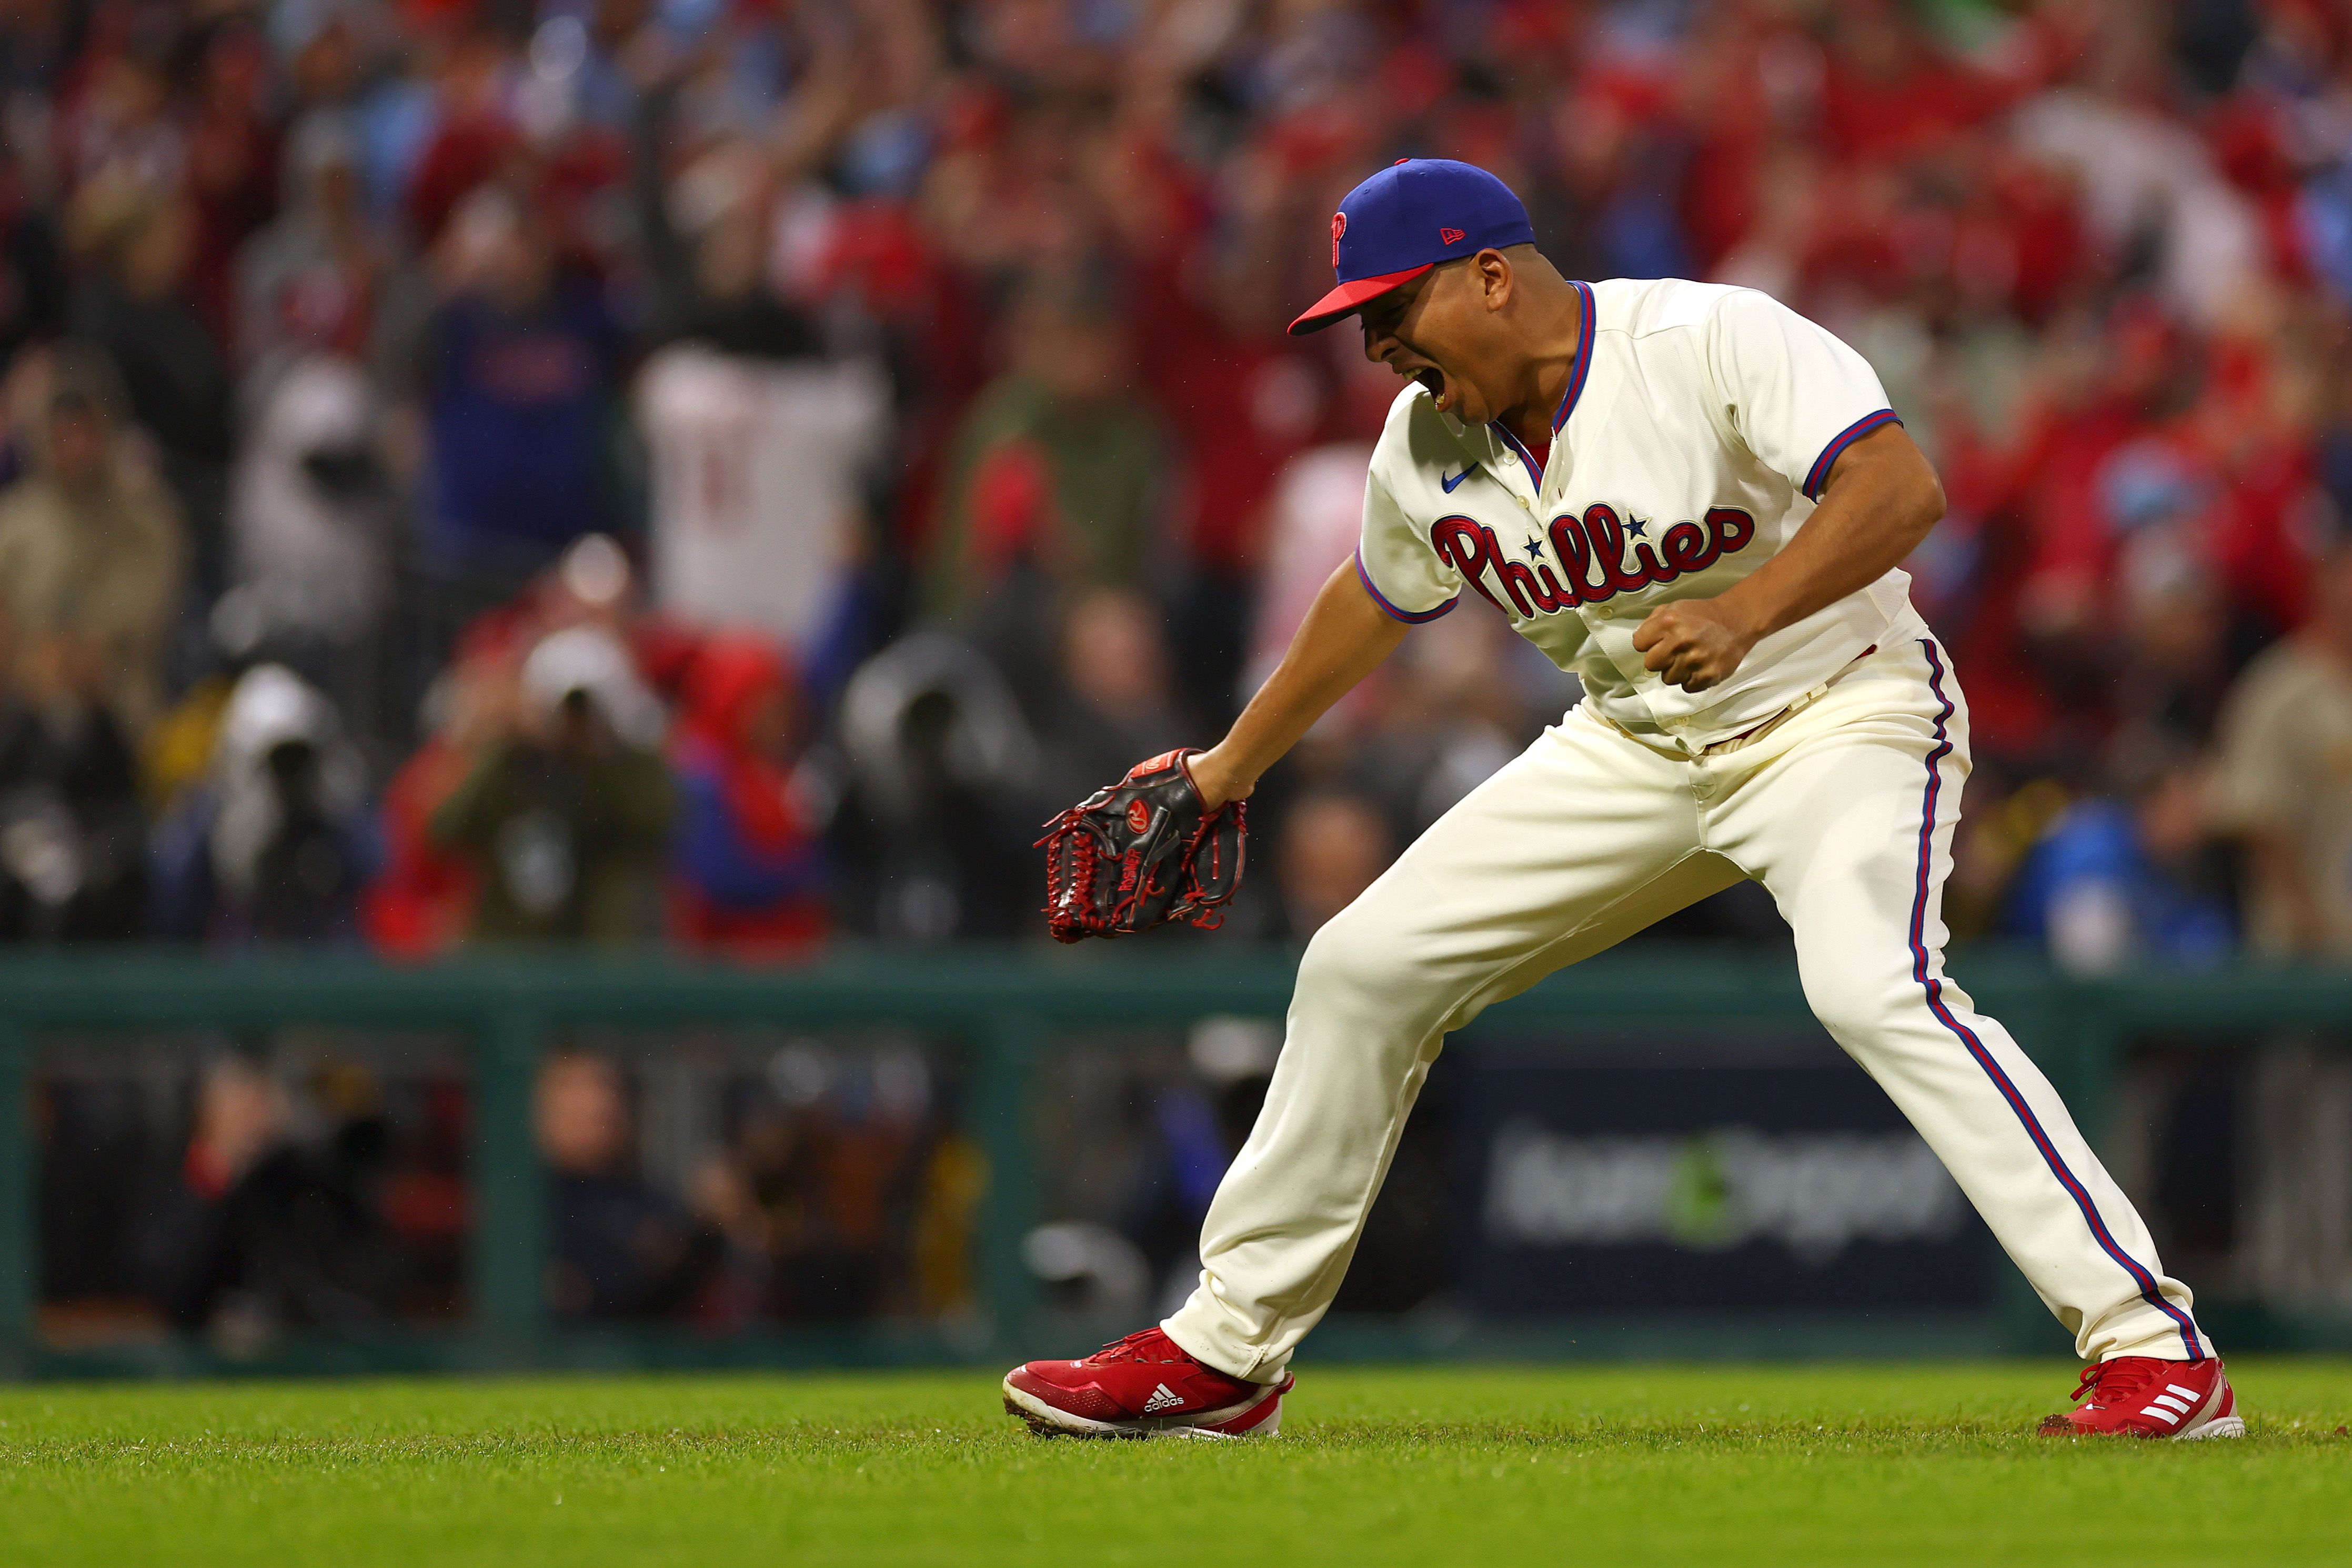 Can the Philadelphia Phillies make the playoffs?